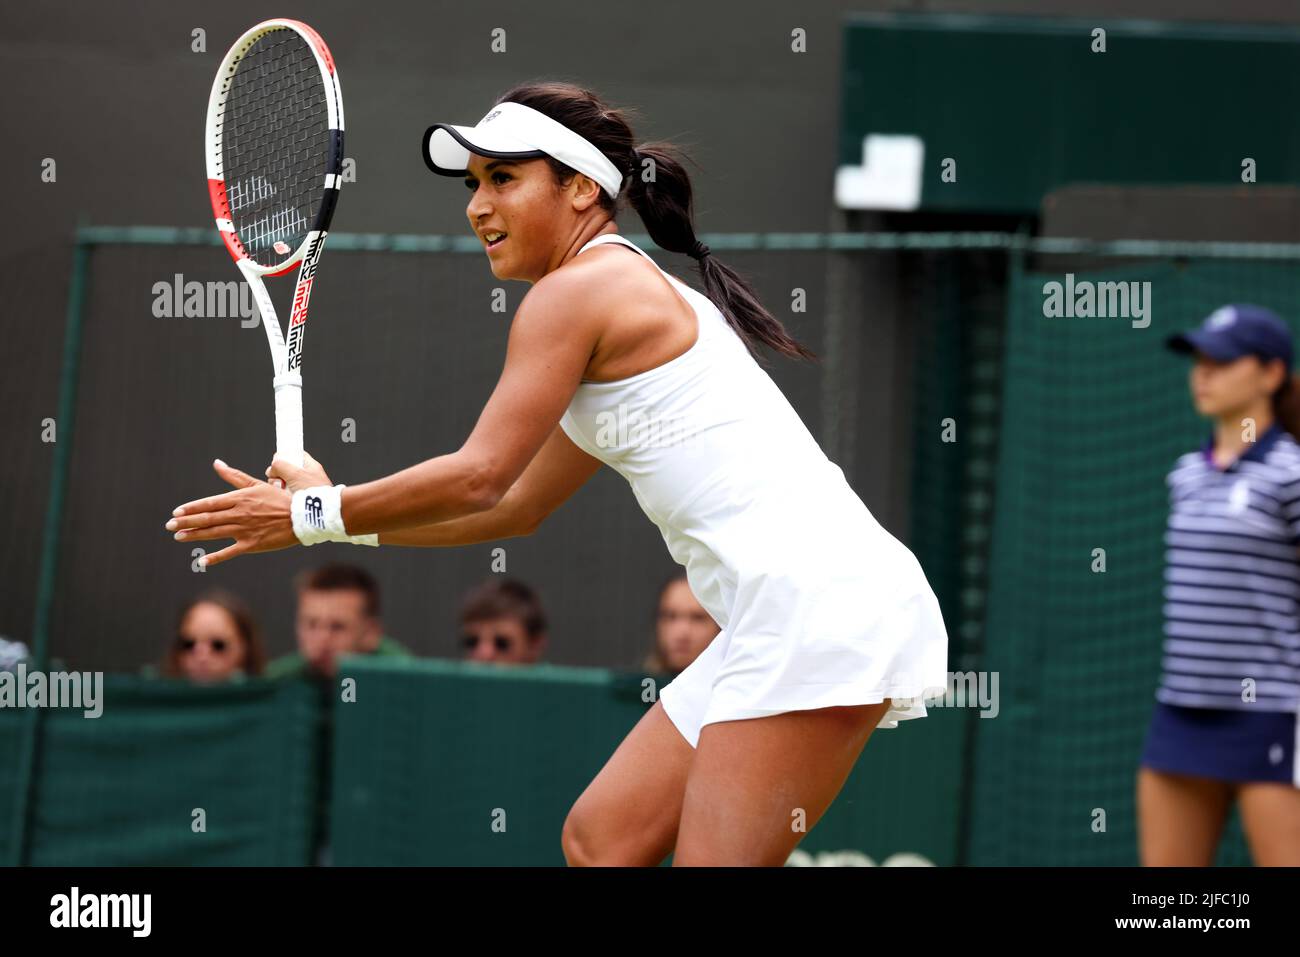 London, UK. 1 July 2022 - Great Britain's Heather Watson sets up a forehand during her second round match against Kaja Juvan of Slovenia Credit: Adam Stoltman/Alamy Live News Stock Photo